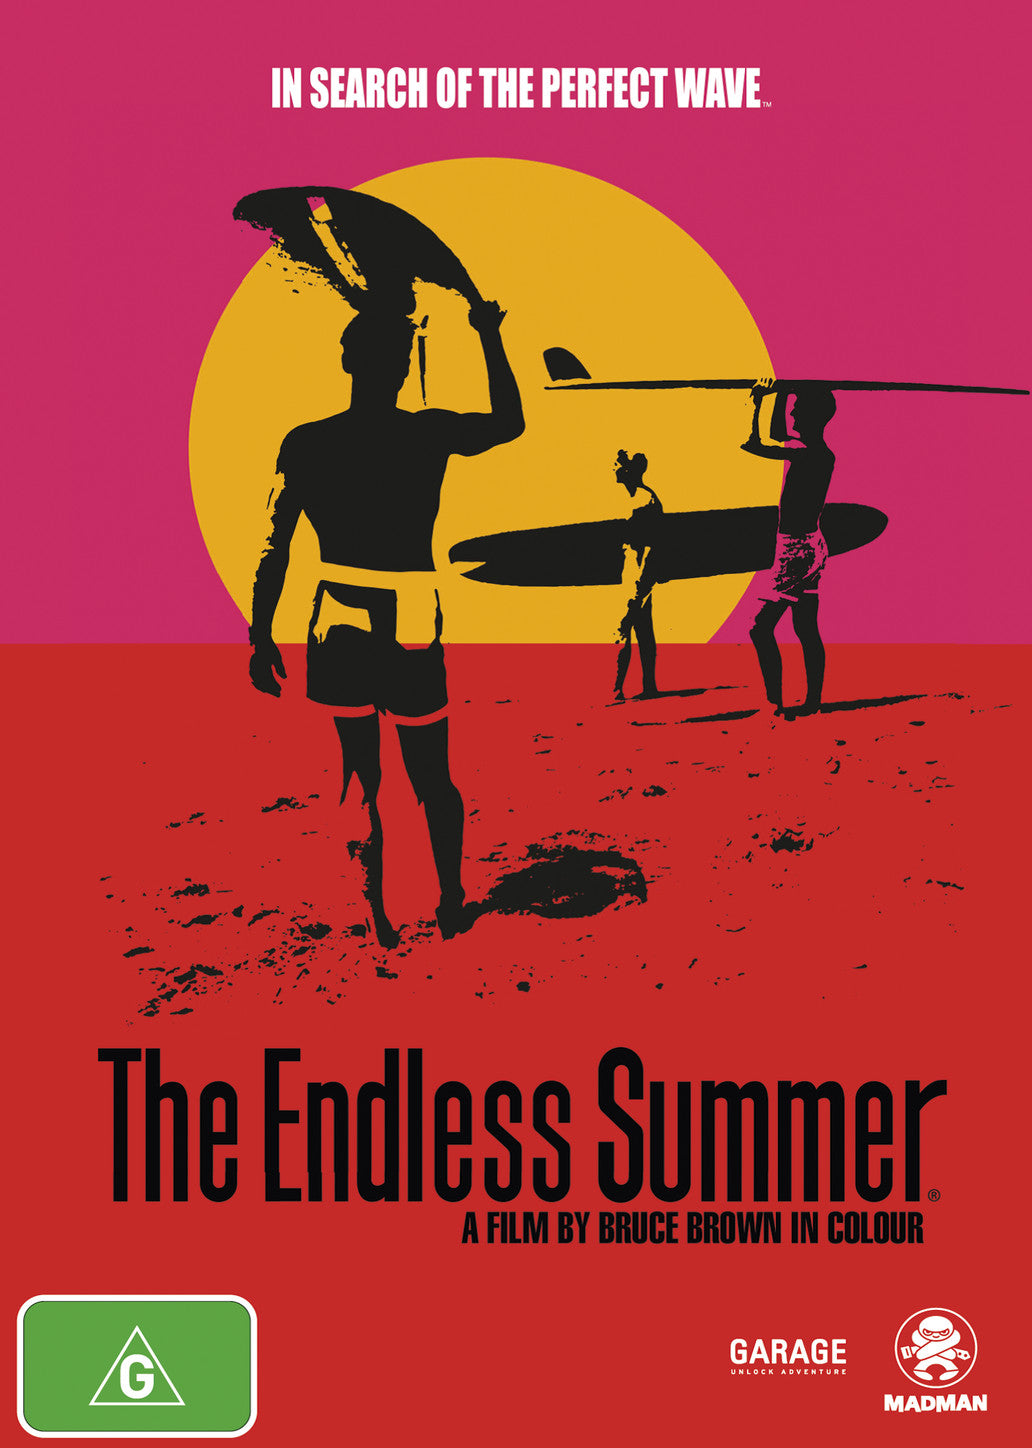 THE ENDLESS SUMMER (1964)